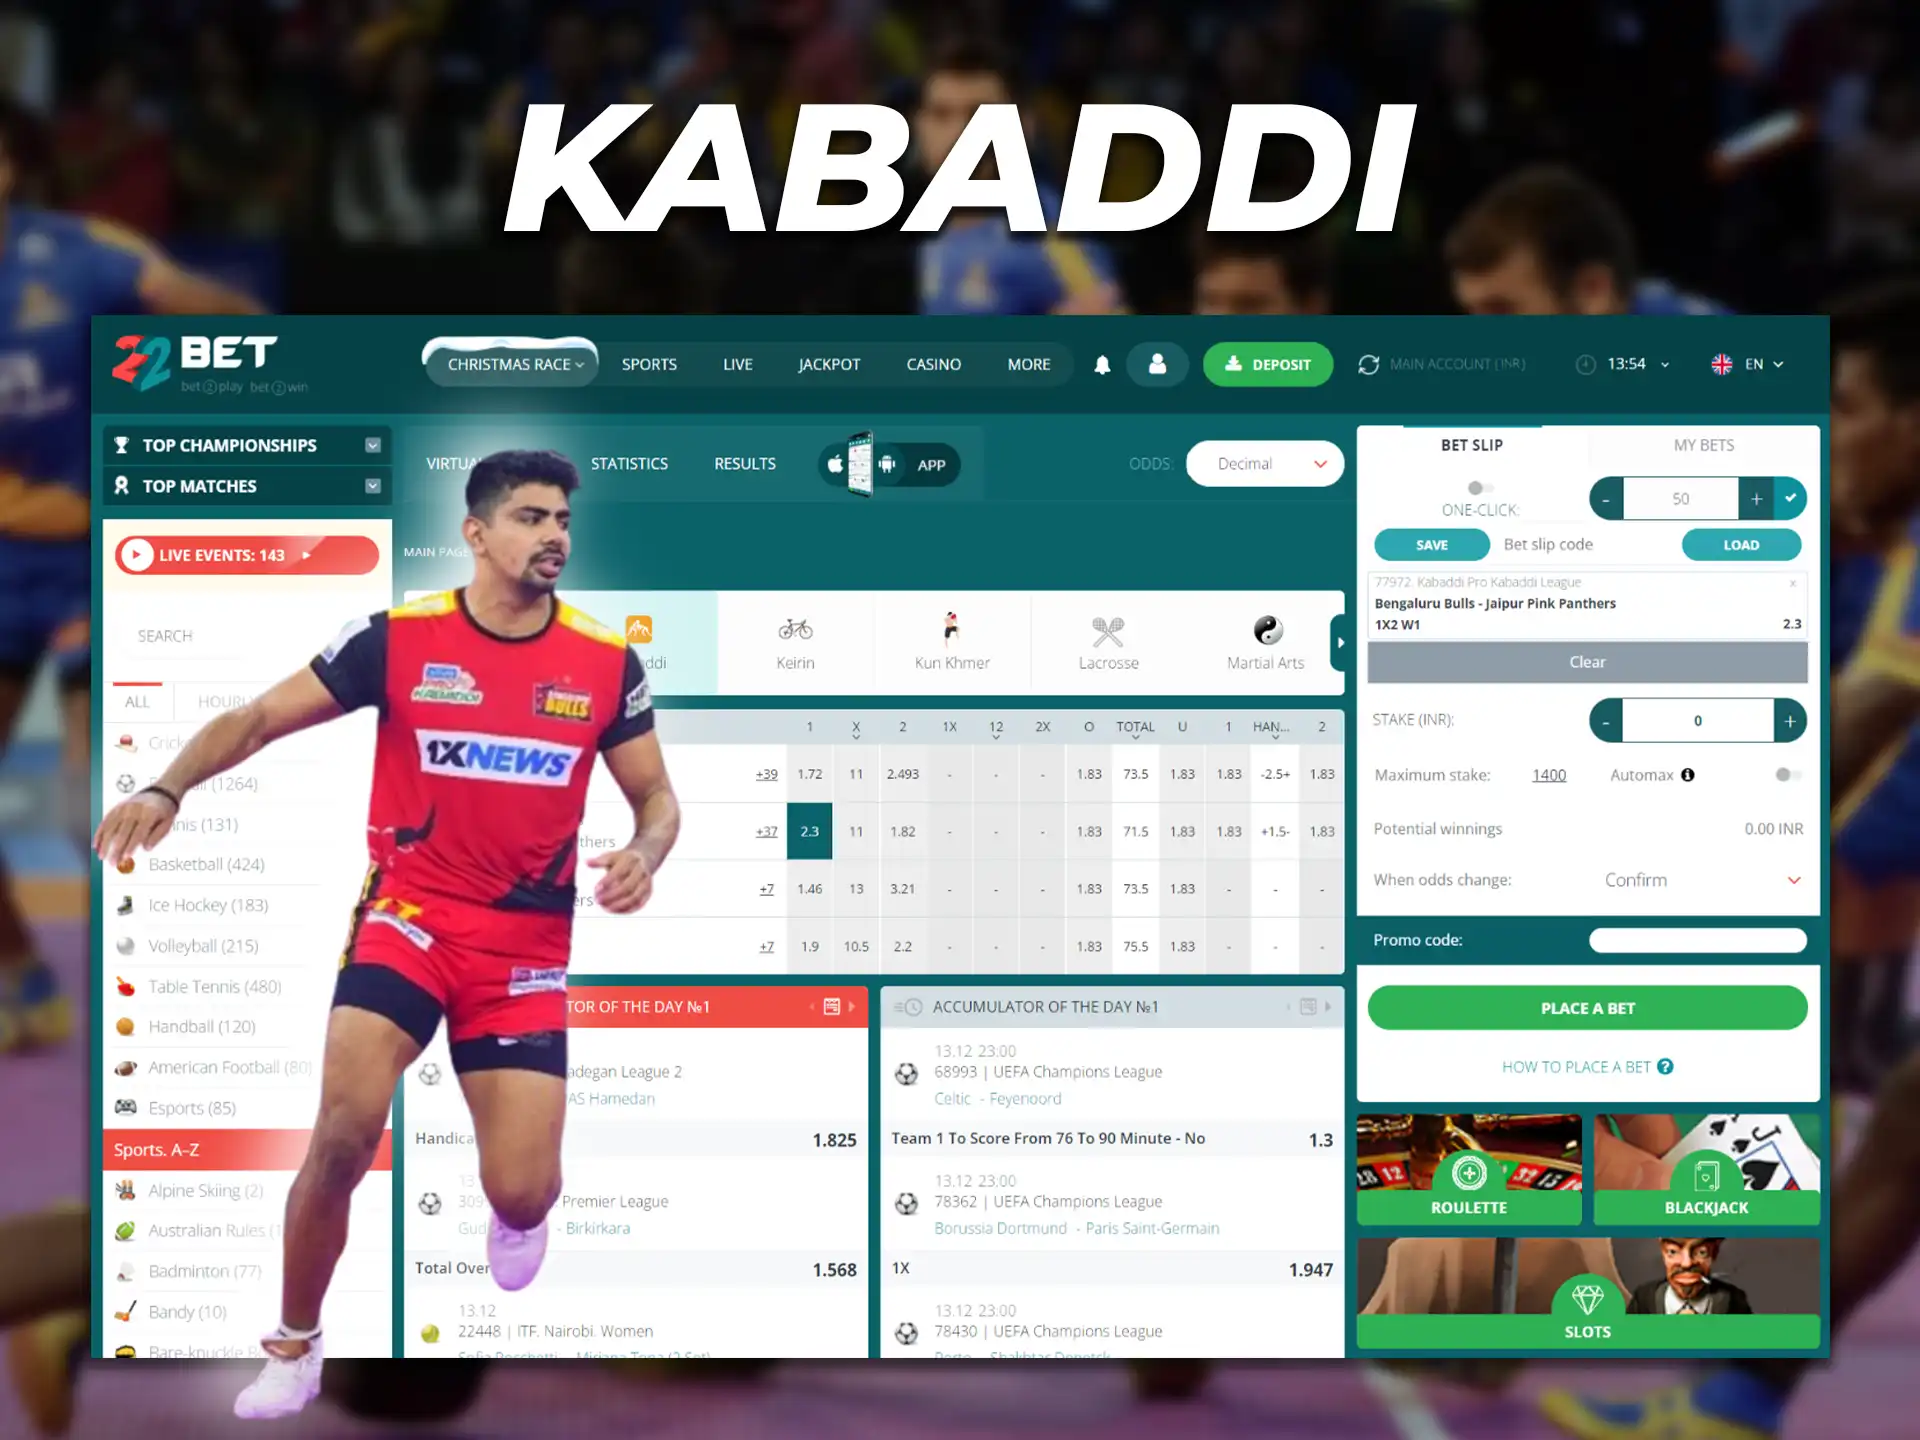 You can bet on one of the oldest sports in India Kabaddi.